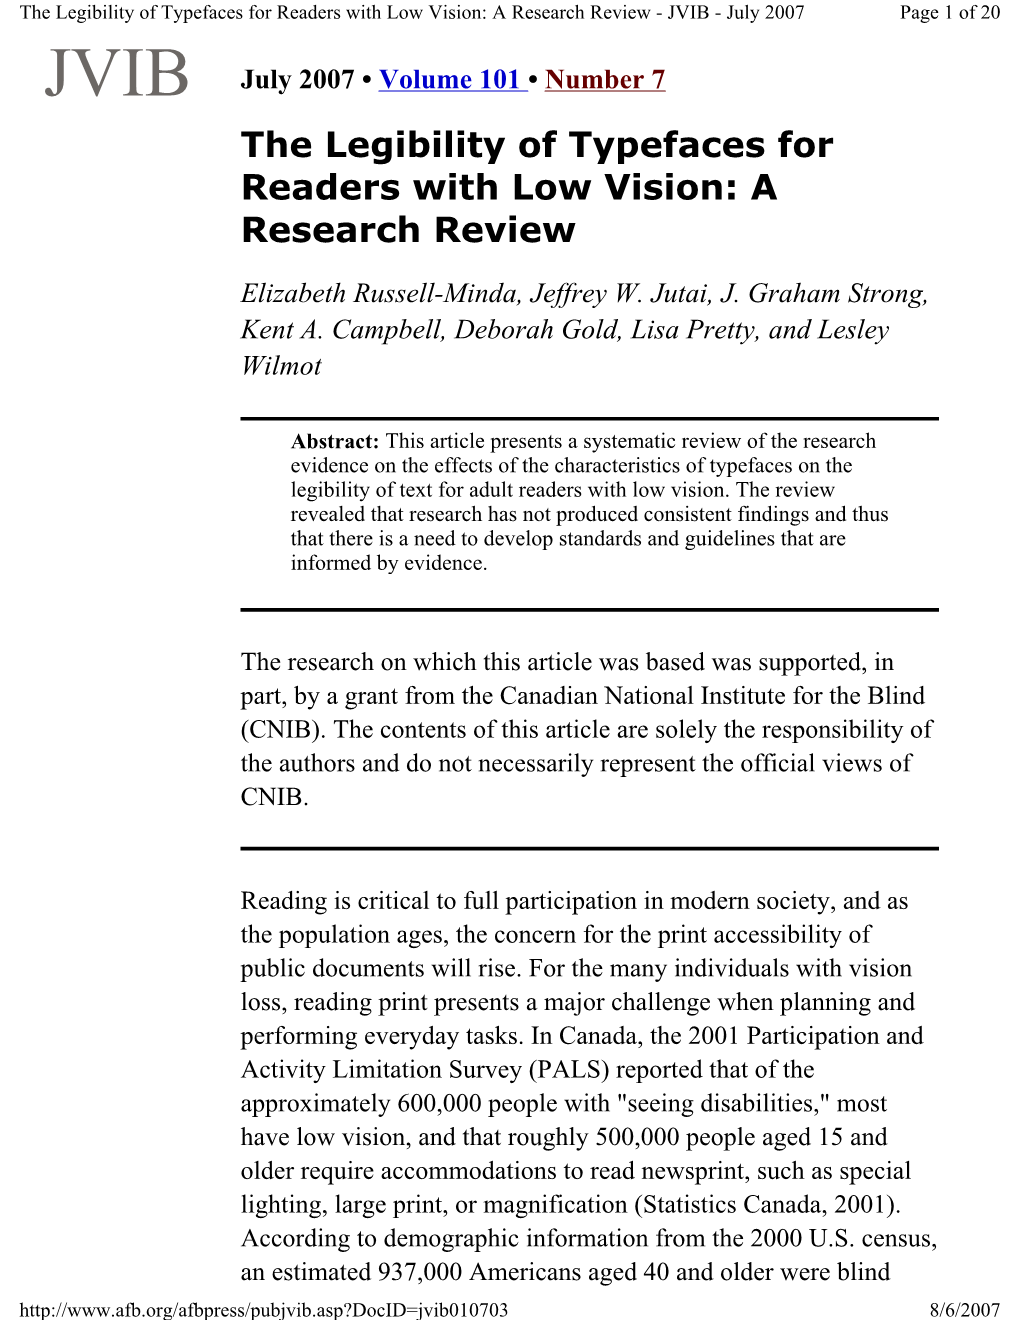 The Legibility of Typefaces for Readers with Low Vision: a Research Review - JVIB - July 2007 Page 1 of 20